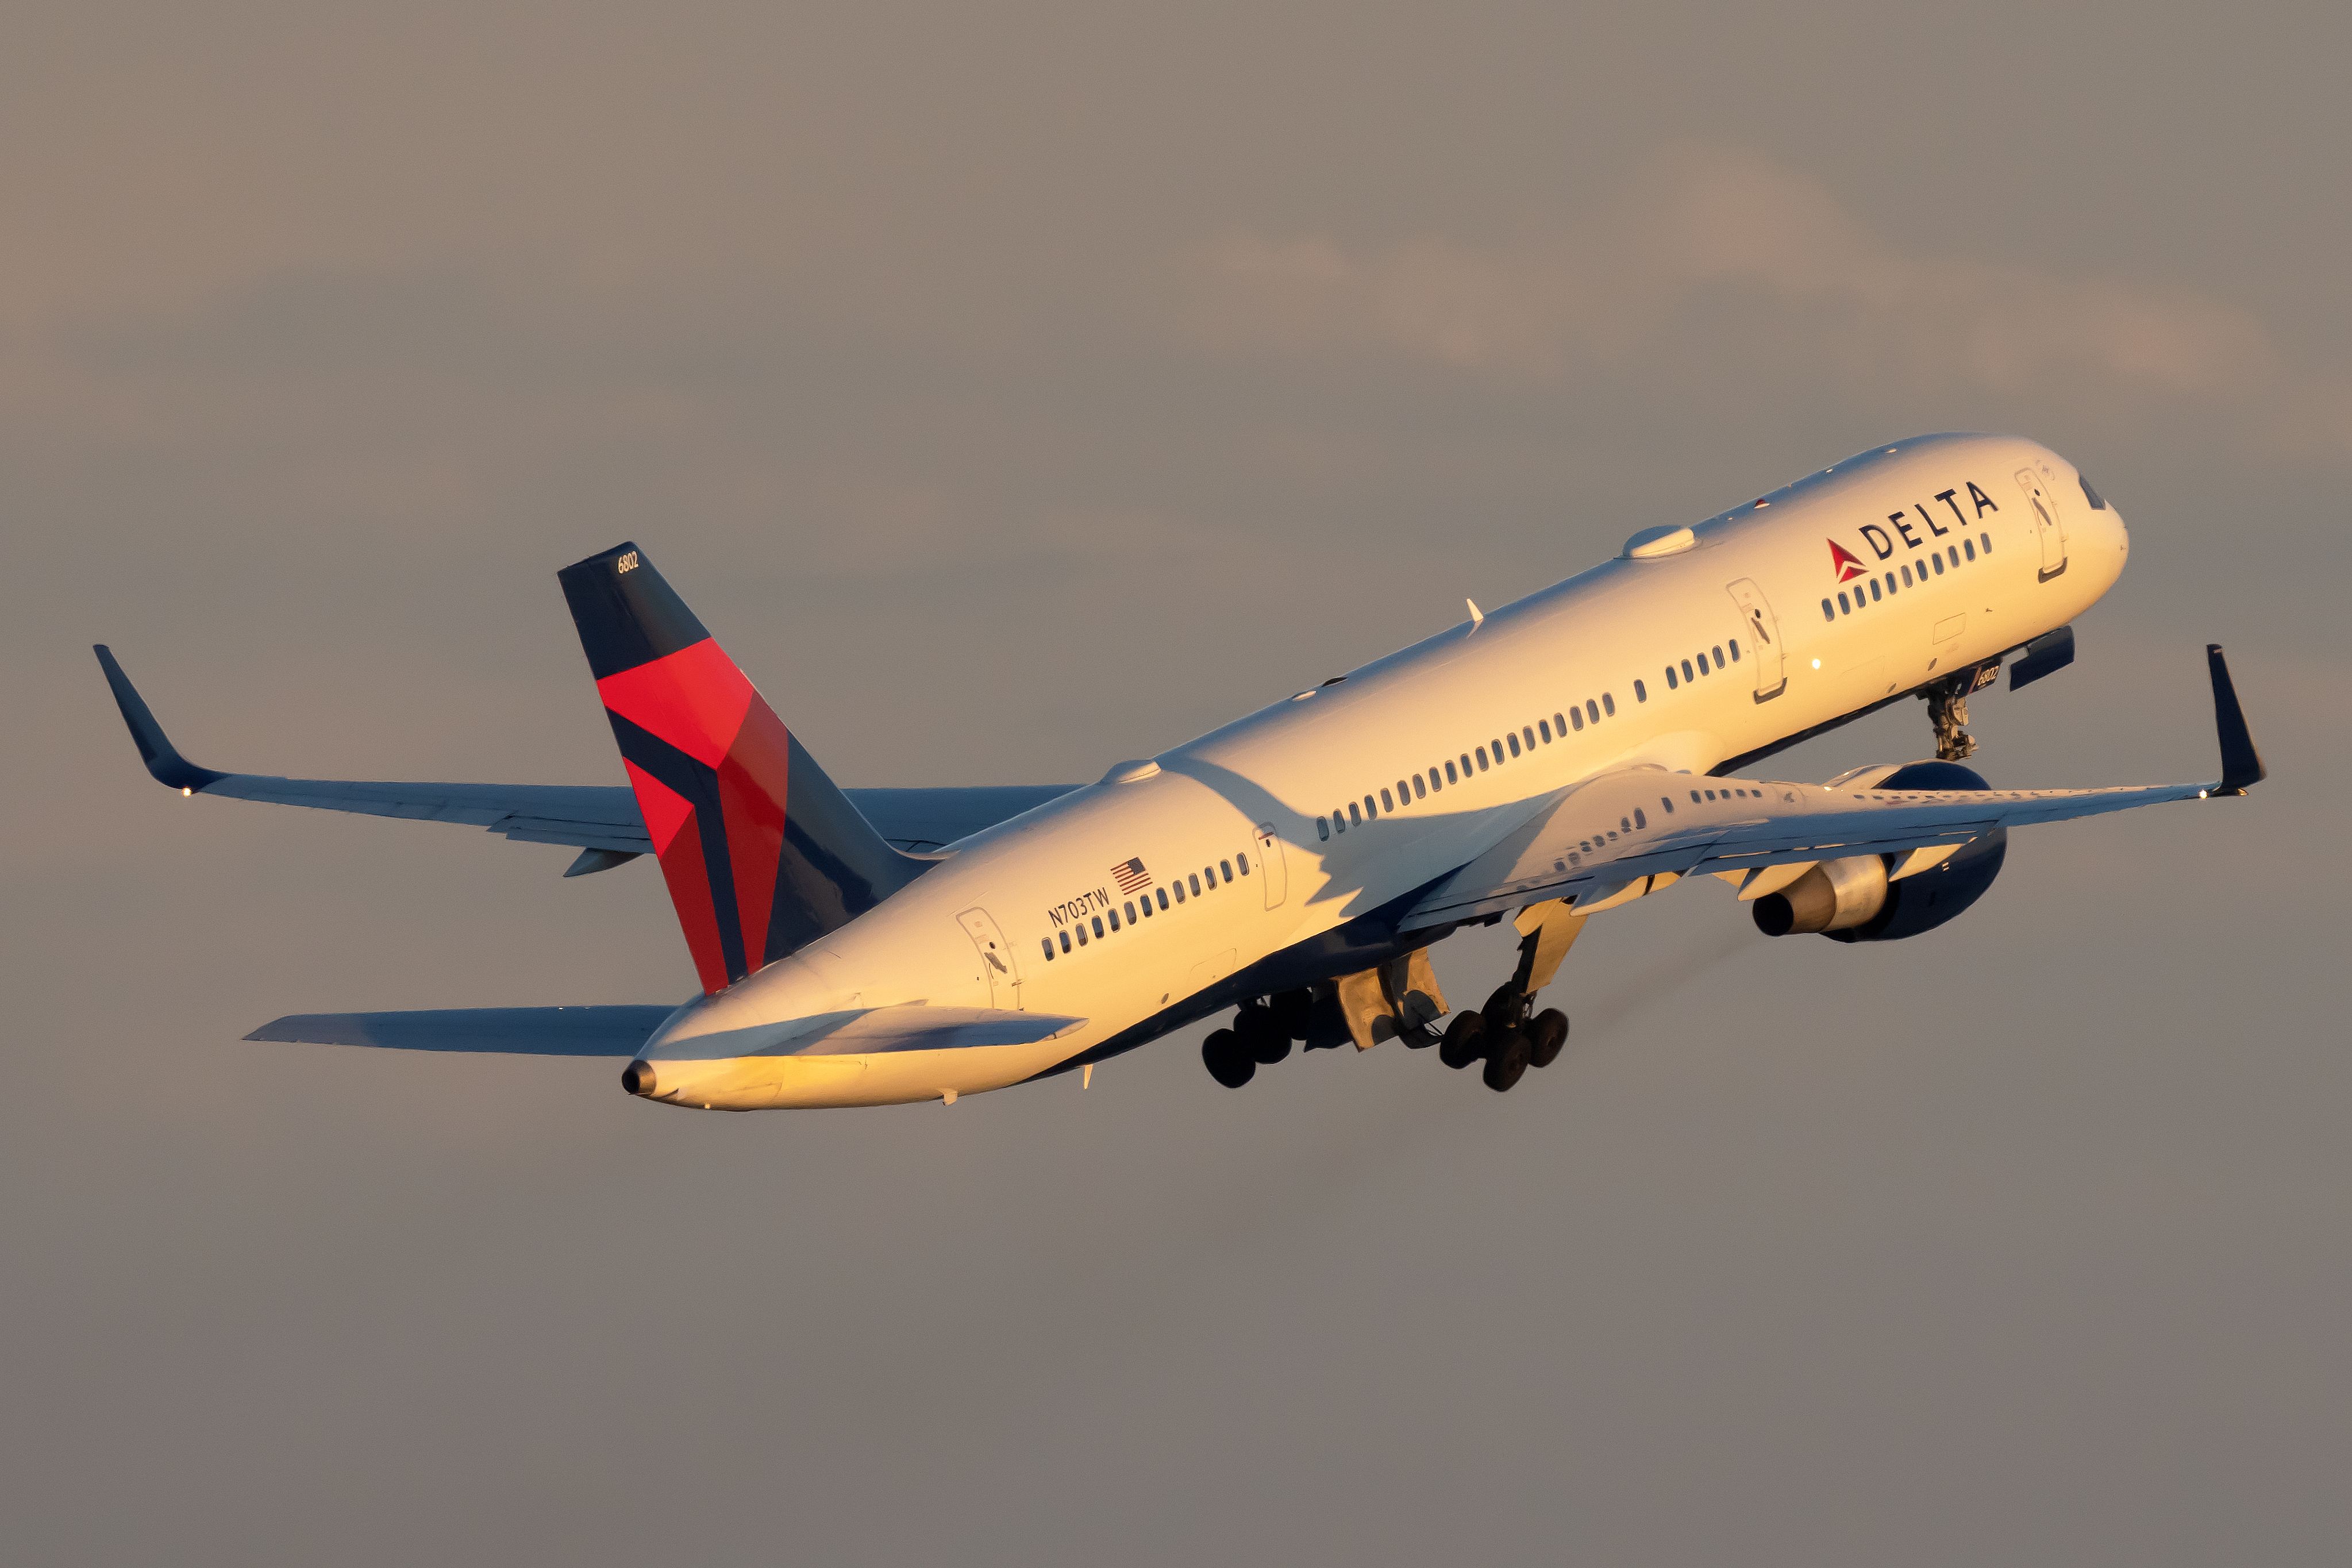 A Delta Air Lines Boeing 757 flying in the sky.